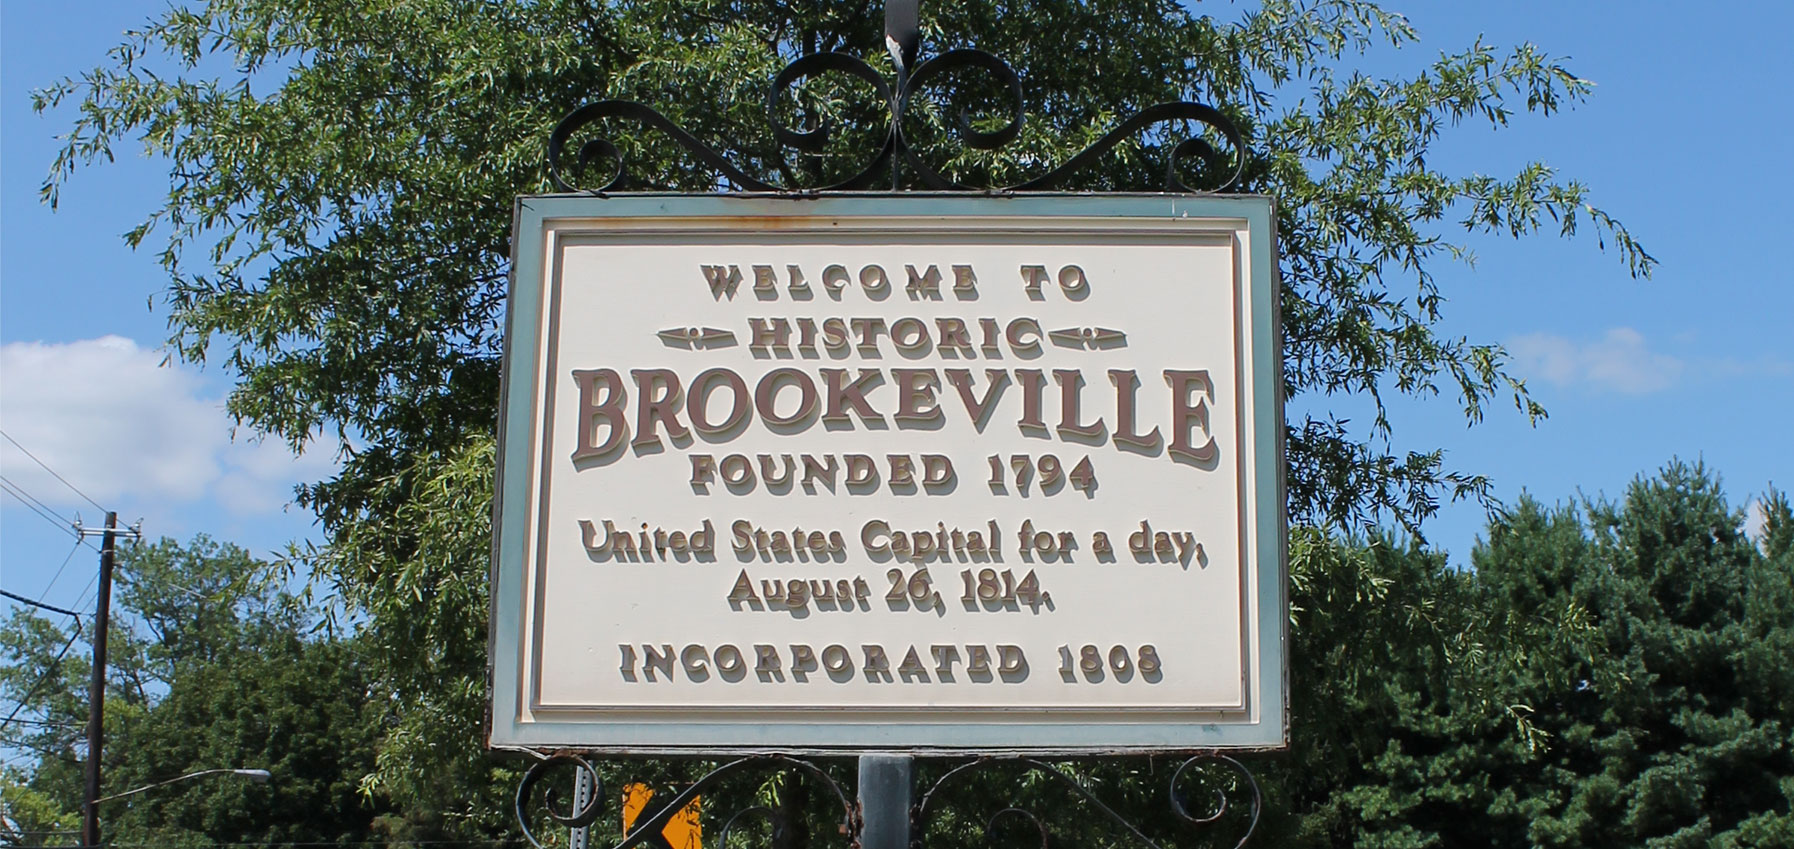 A photo of the sign seen entering Brookeville, MD, founded in 1974, US Capital for a day, 1814